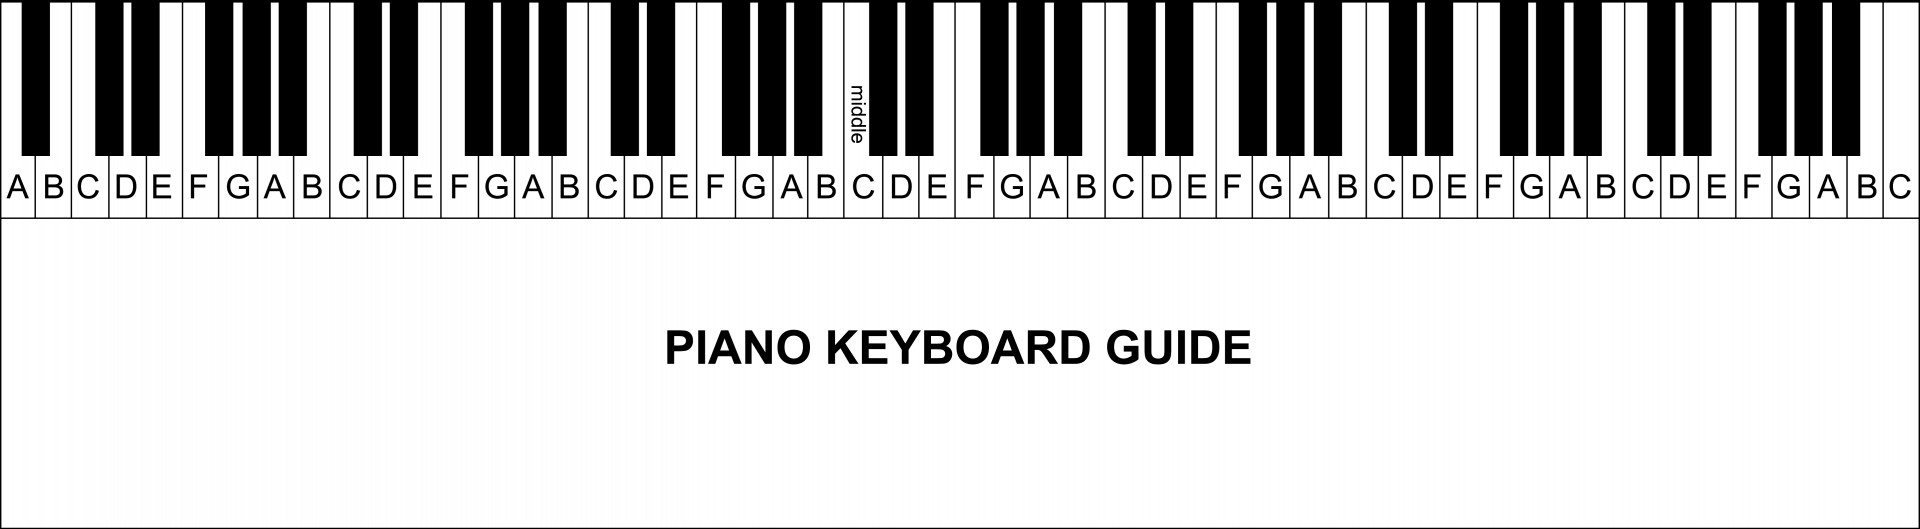 free piano clipart black and white